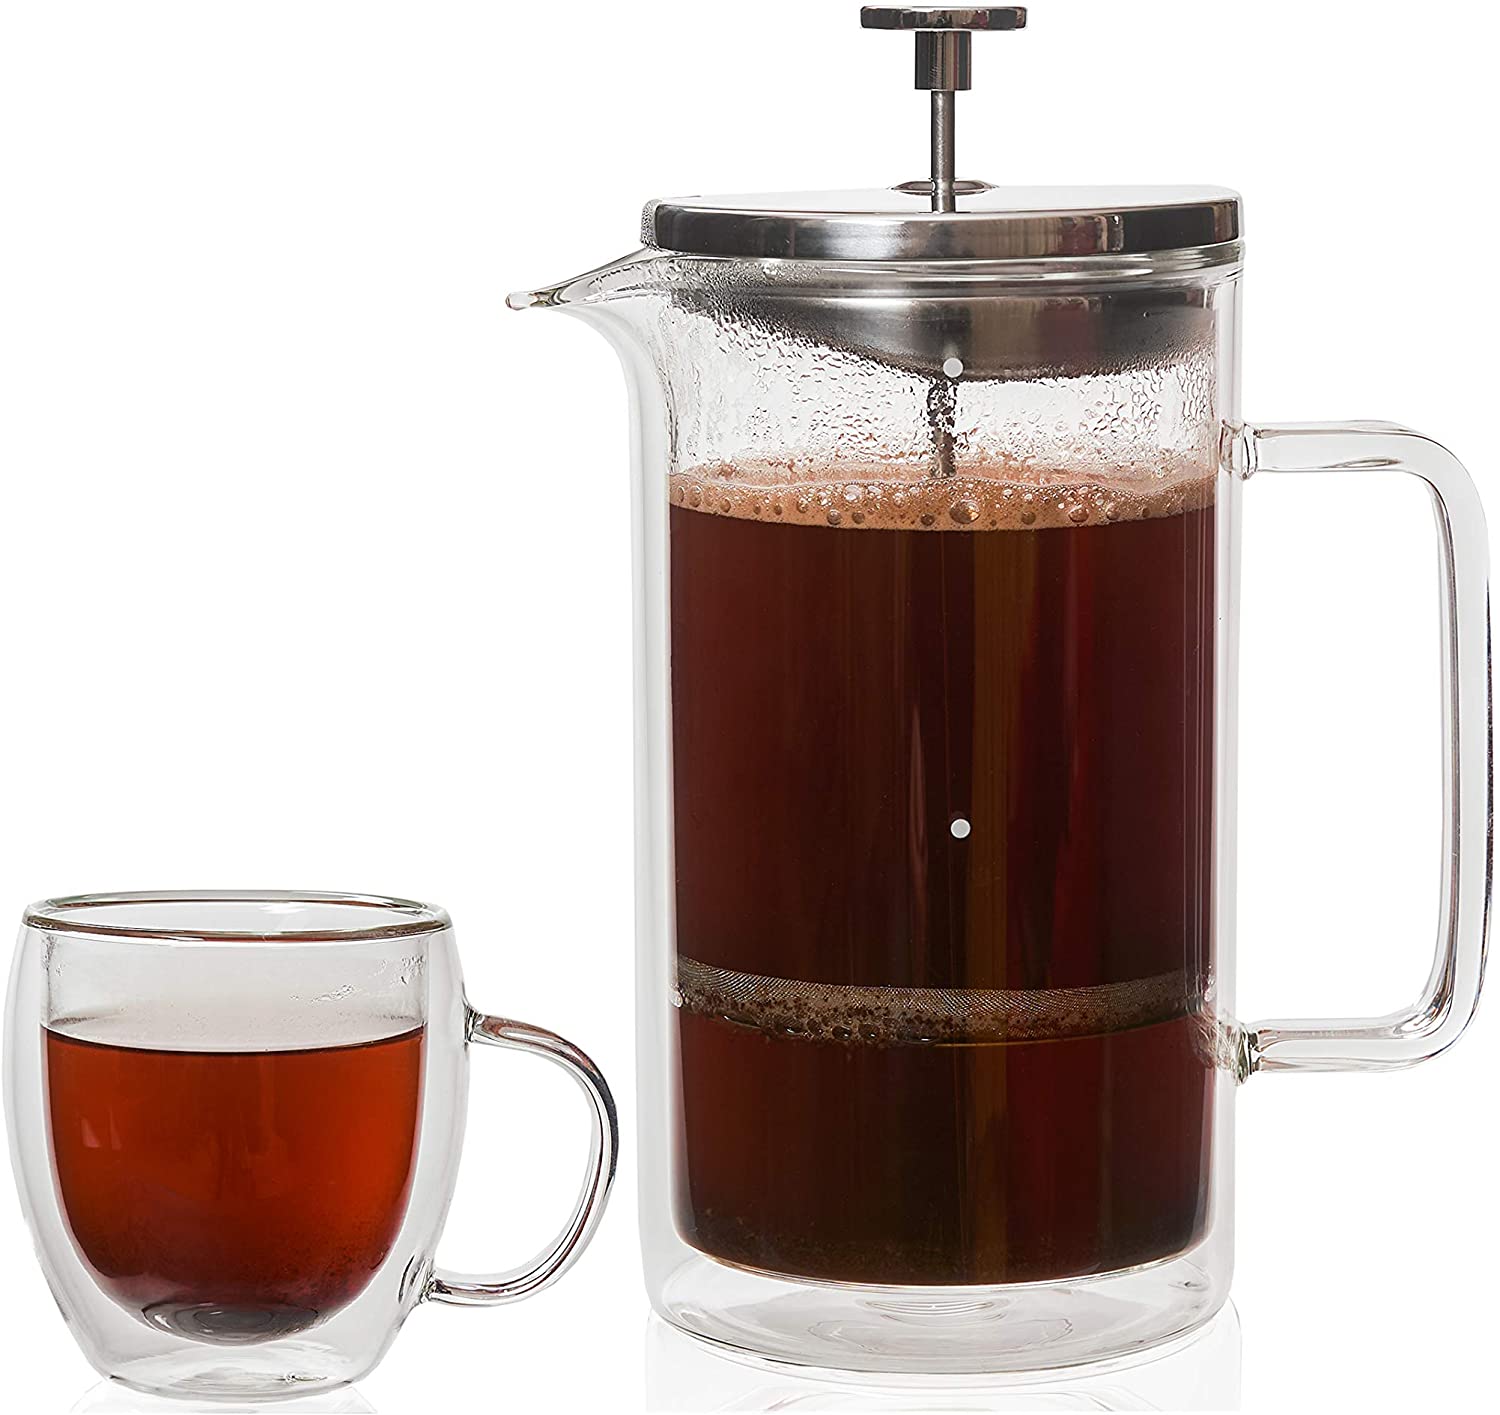 SVETO French Press Coffee Maker 1 Litre (1000 ml) – Thermal Coffee Press Double-Walled Insulated – Includes Double-Walled Glass Coffee Cup